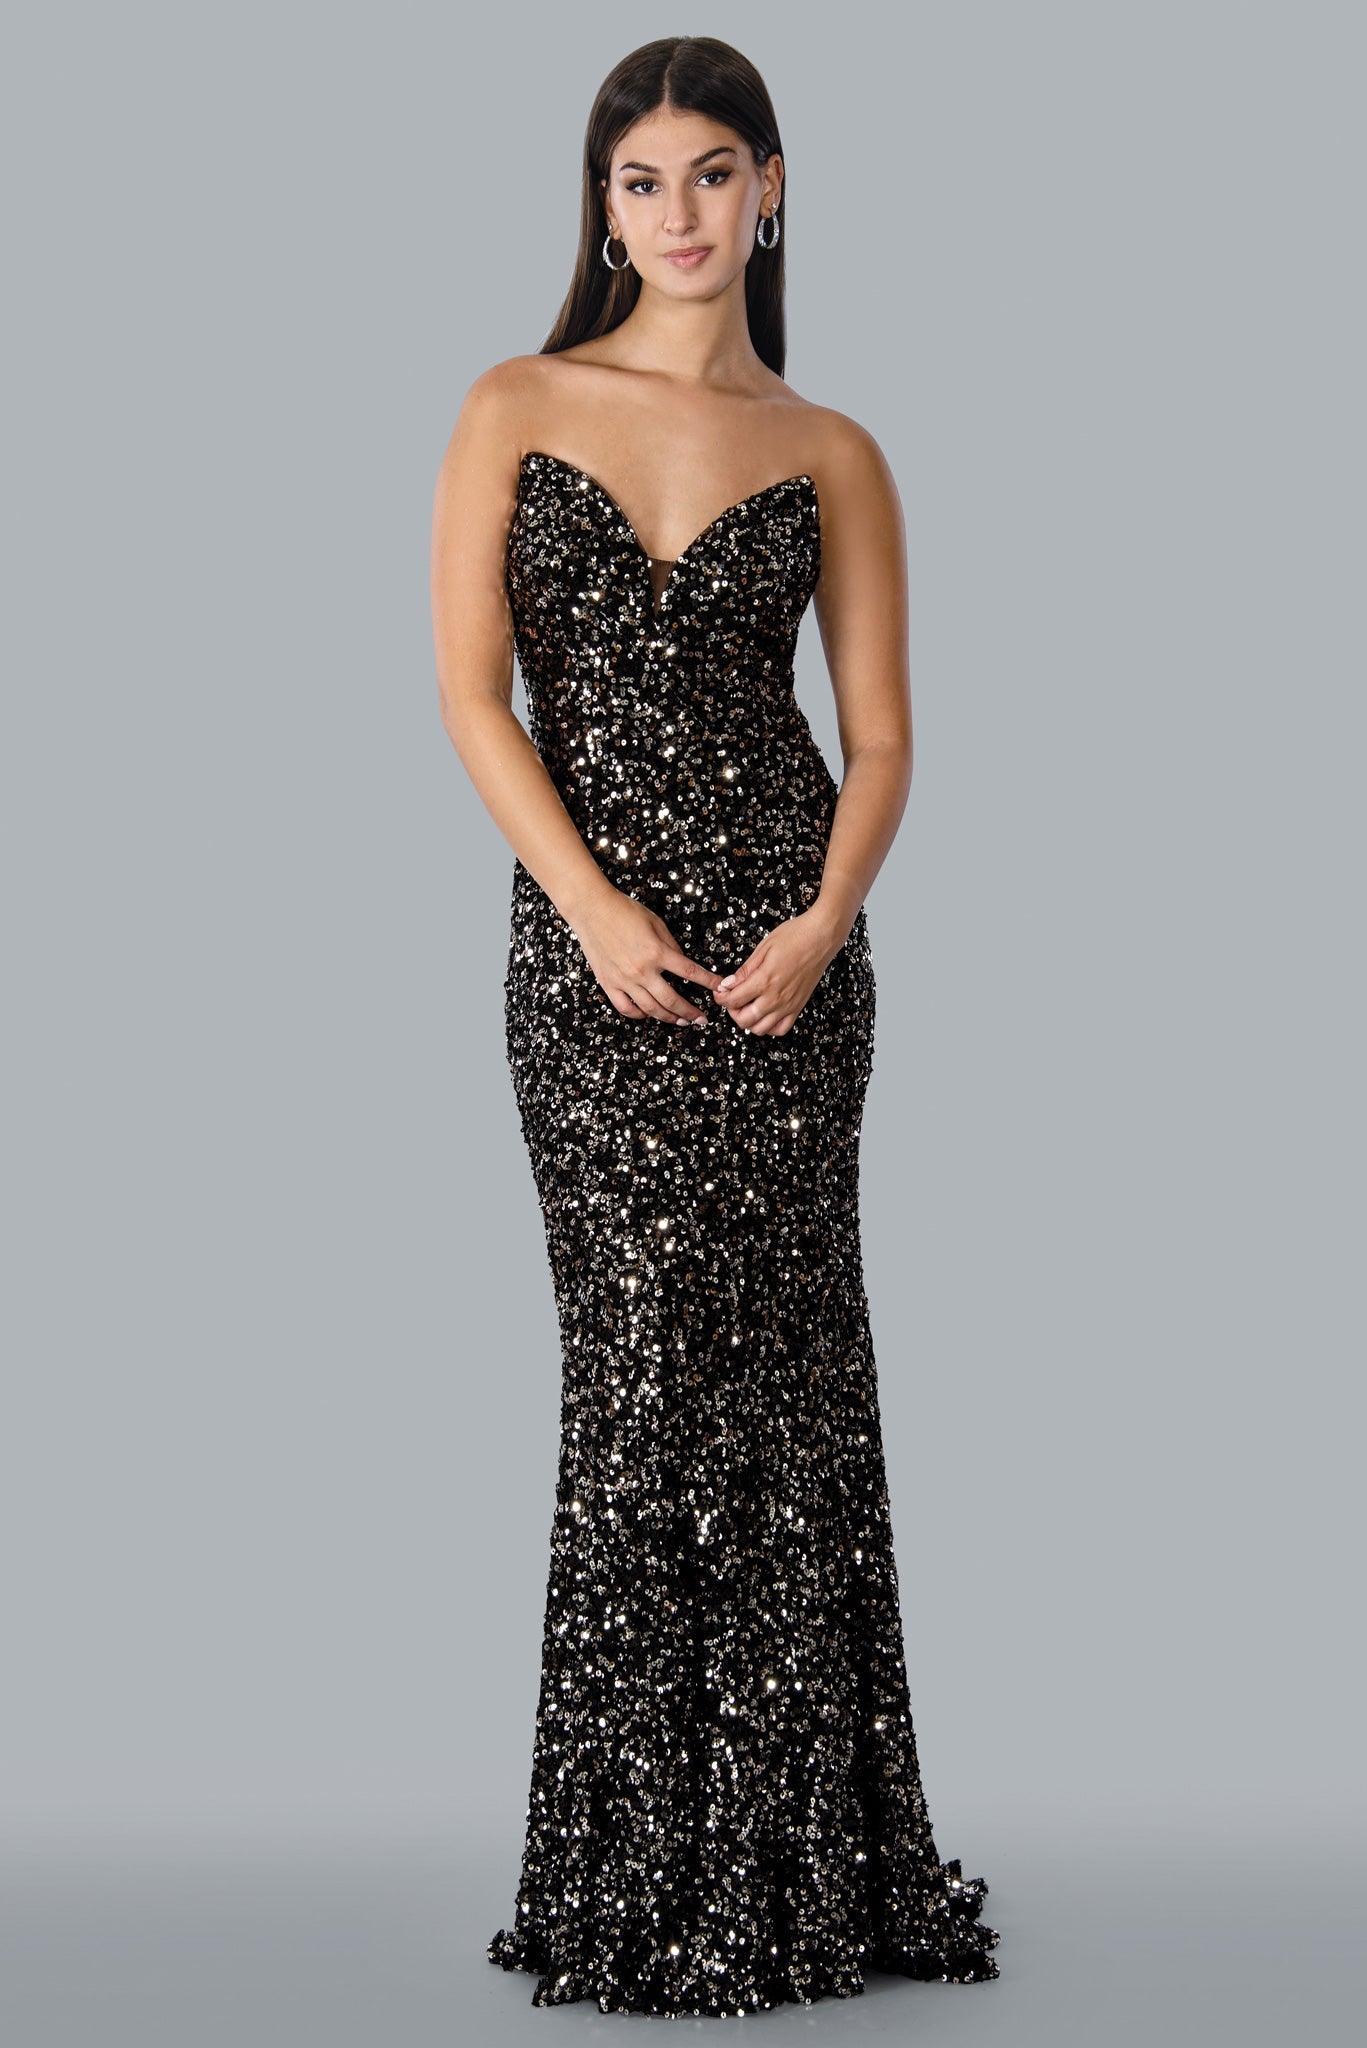 Stella Couture 23130 Long Fitted Sequin Peak Point Formal Pageant Gown Prom Dress V neckline.  Available Sizes: 0-16  Available Colors: Black, Red, Rose